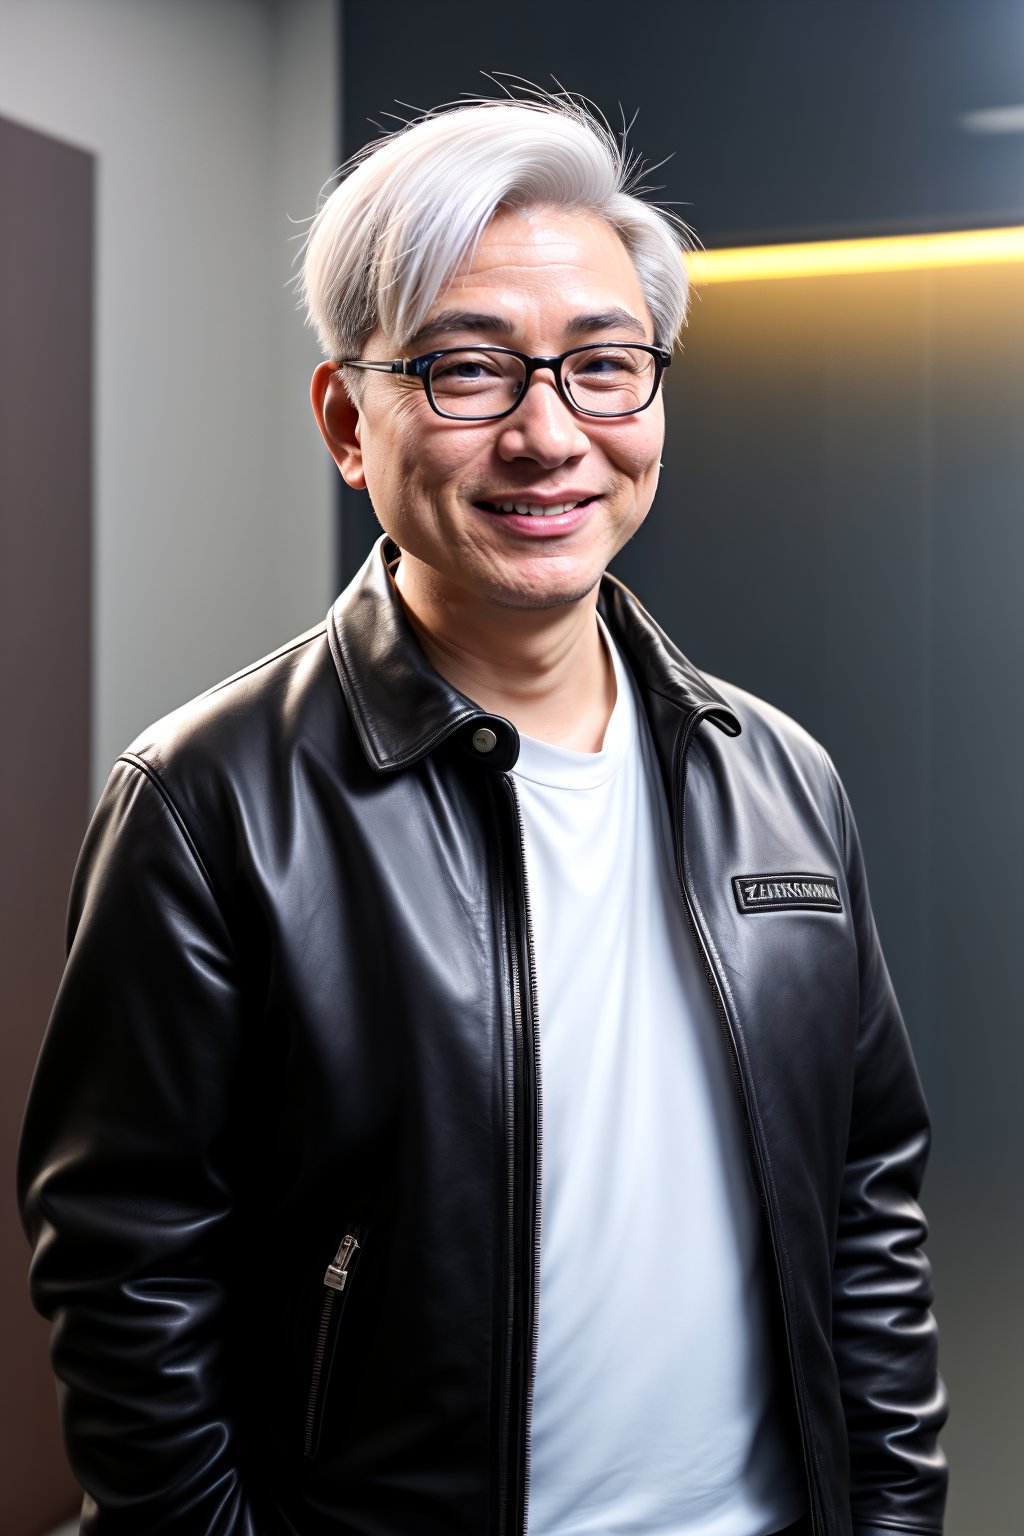 nvidia, smiling, standing, middle-aged,Eyes are sharp,Thick chin, Asian male focal point, notoginseng white hair, unkempt hairstyle, black-Half-rimmed glasses, Strong build,wearing aBlack leather jacket, nvidia, founder Huang Renxun (Zhan-Heng "Jensen" Huang)